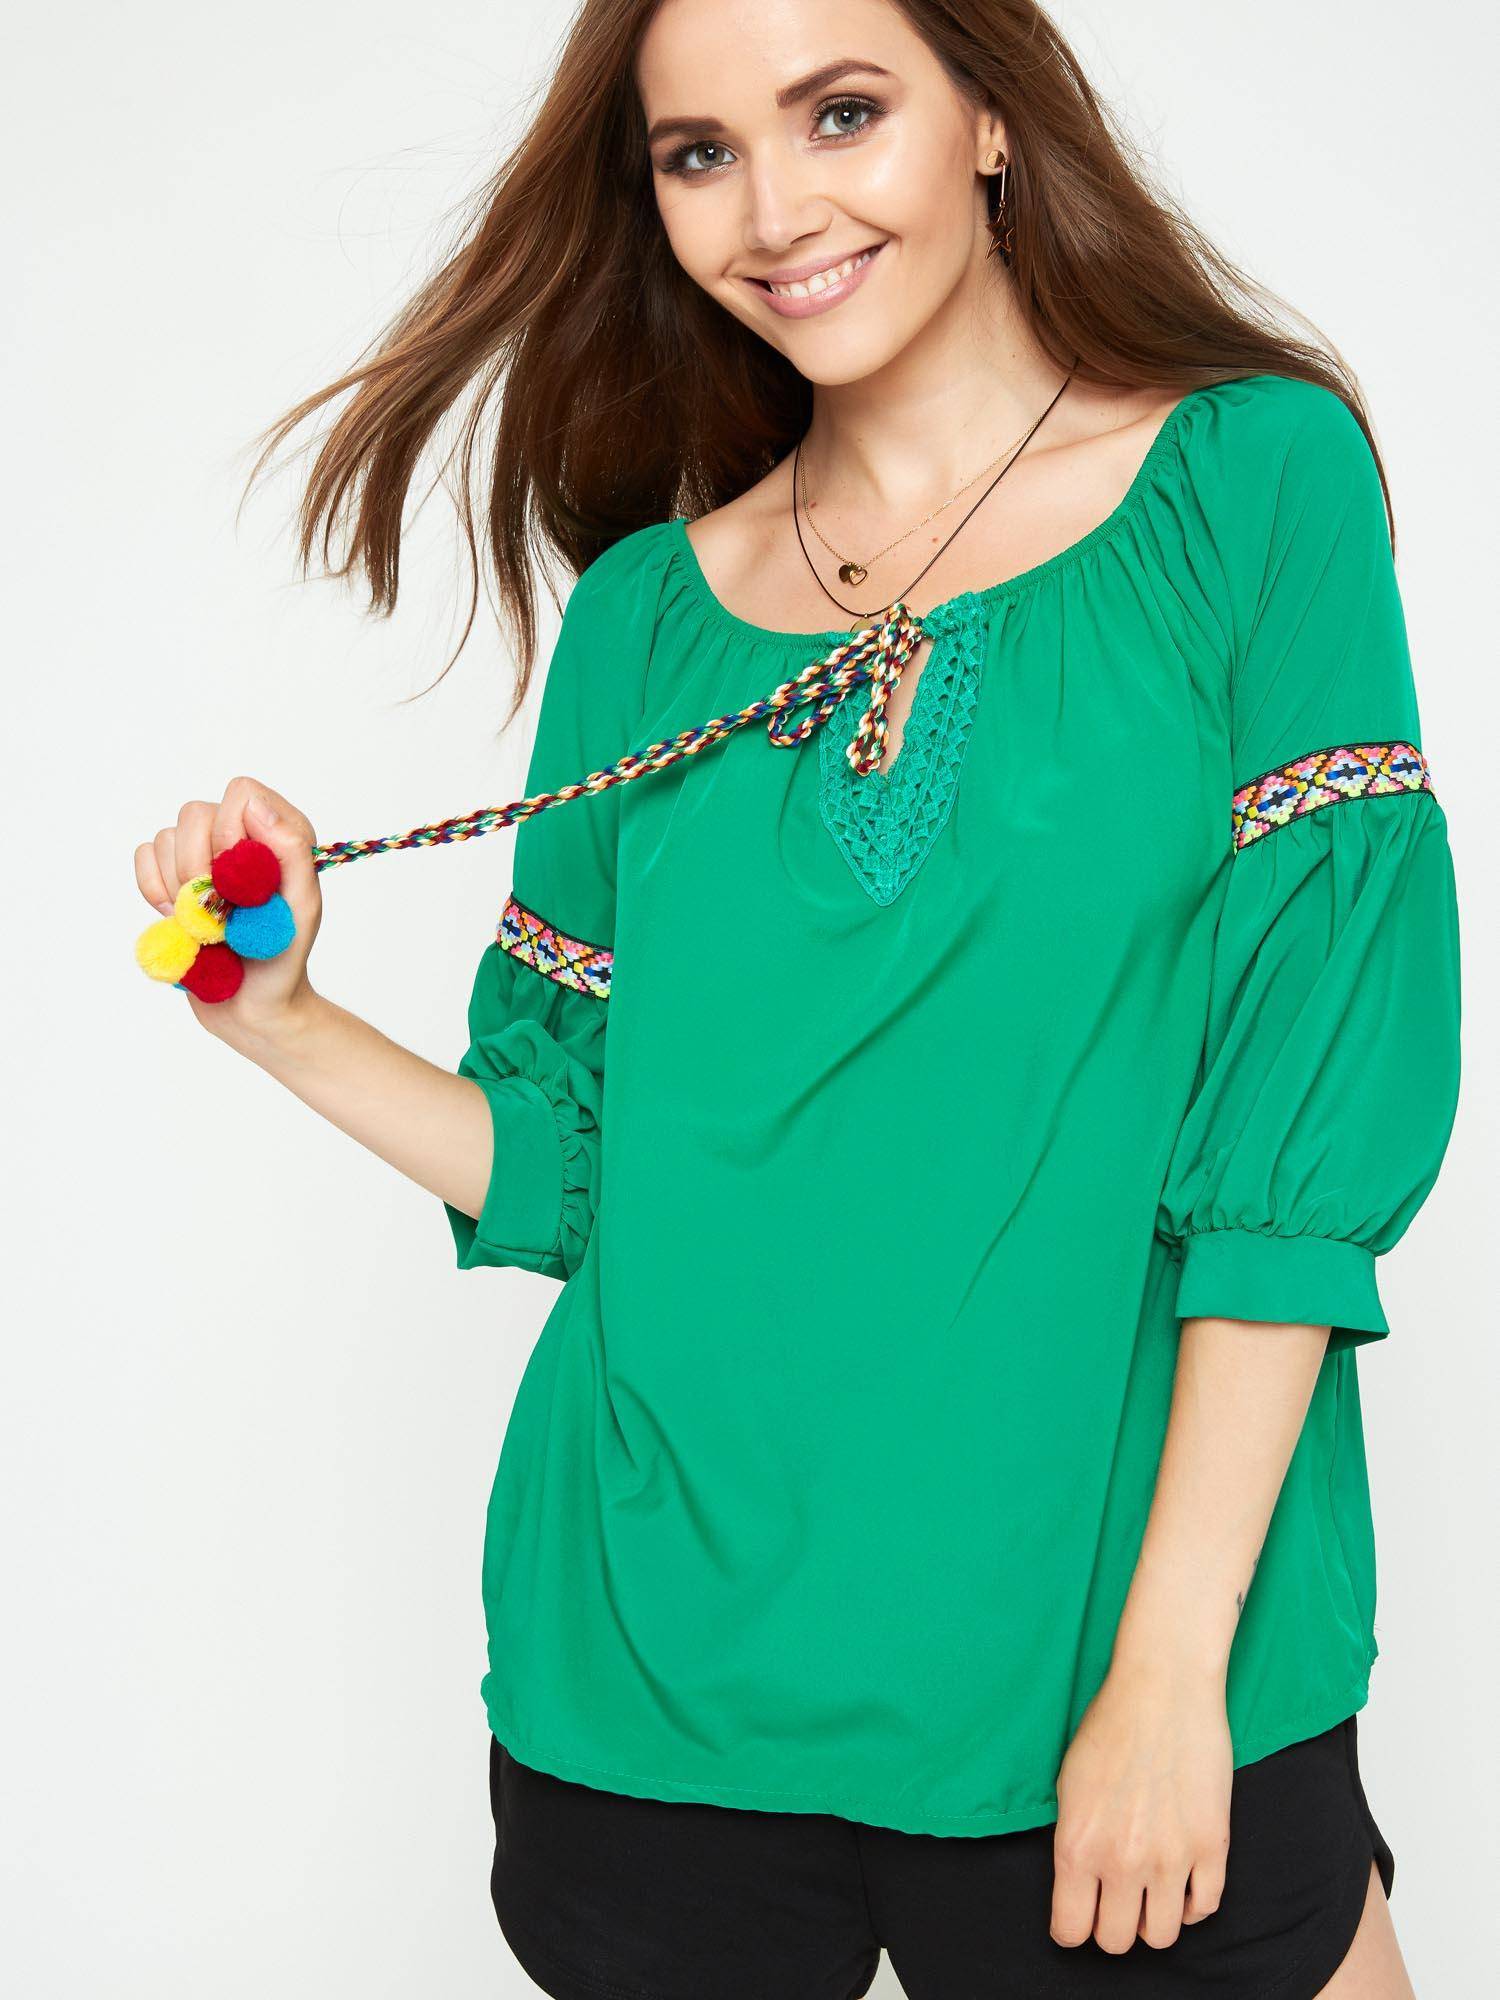 Blouse with decorative green binding